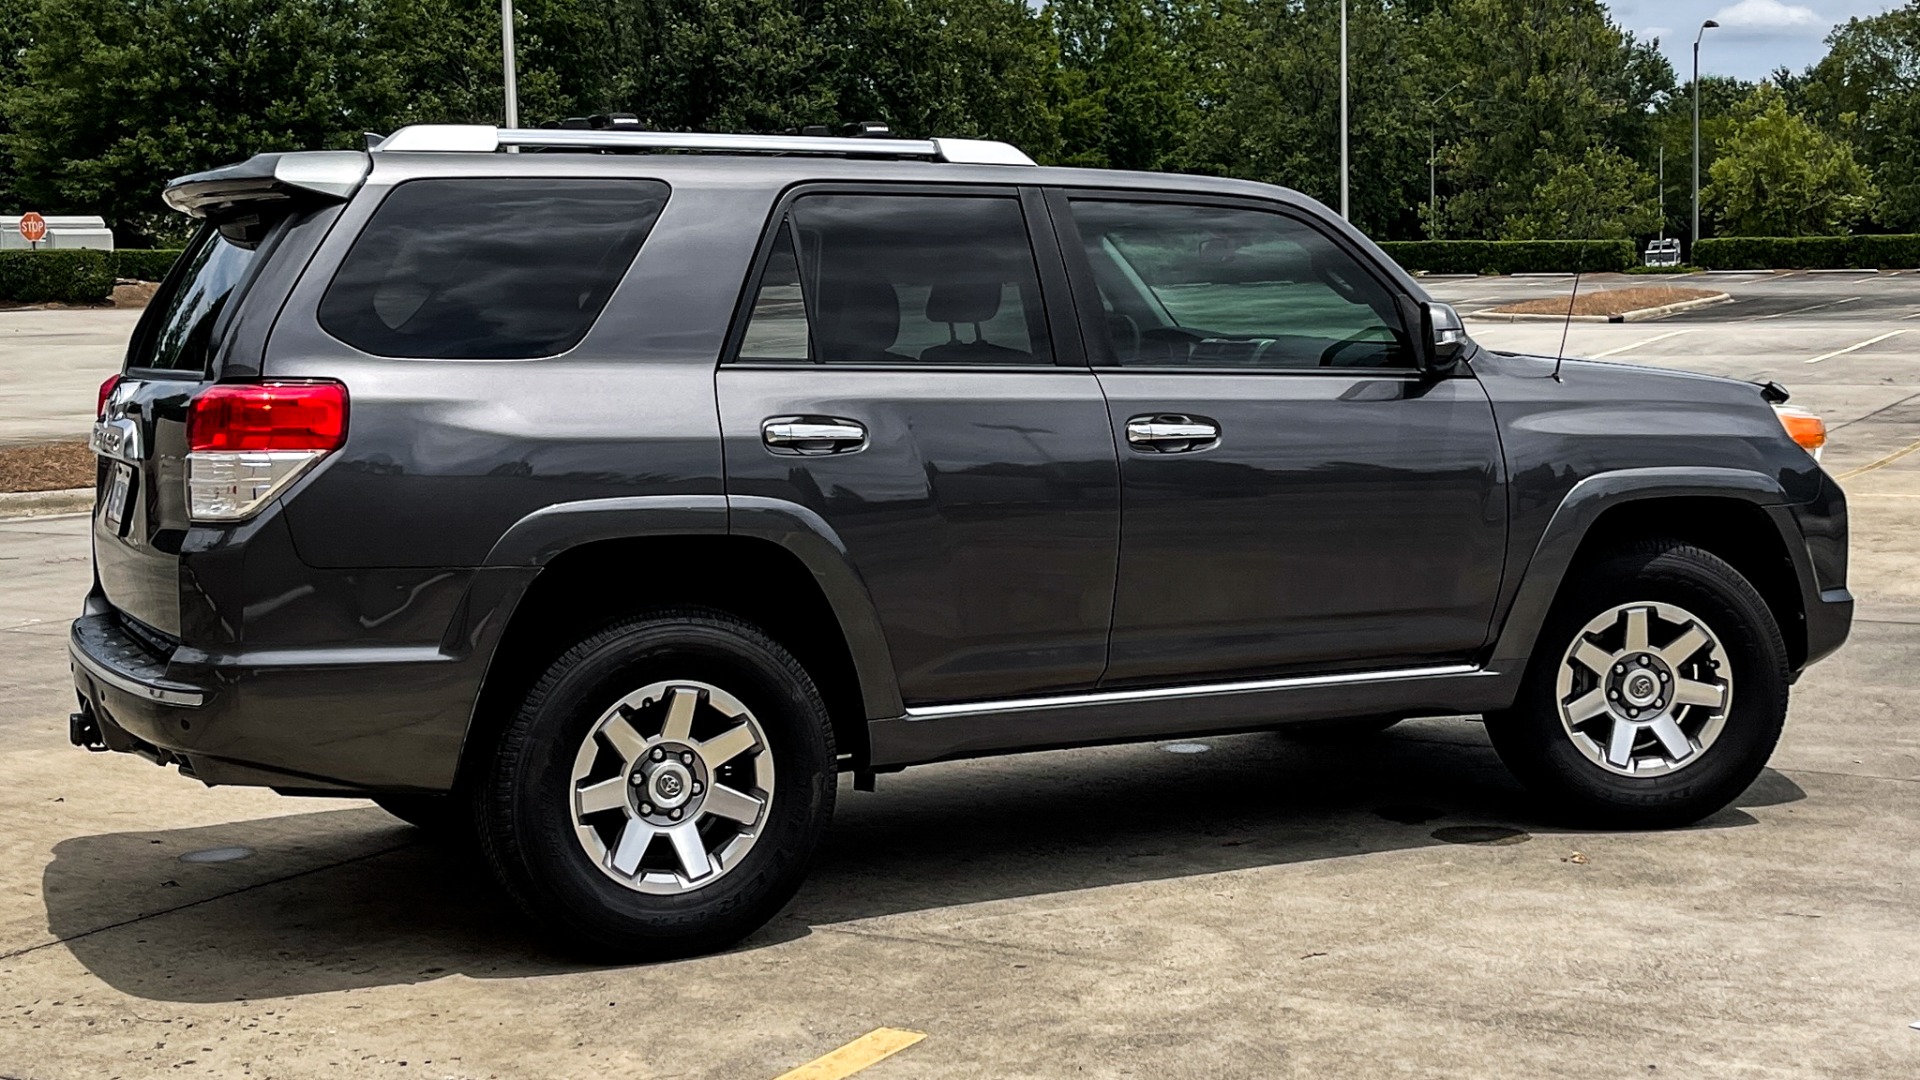 Used 2011 Toyota 4Runner SR5 / SUNROOF / 4X4 / BLUETOOTH / BACKUP CAMERA for sale $19,900 at Formula Imports in Charlotte NC 28227 3